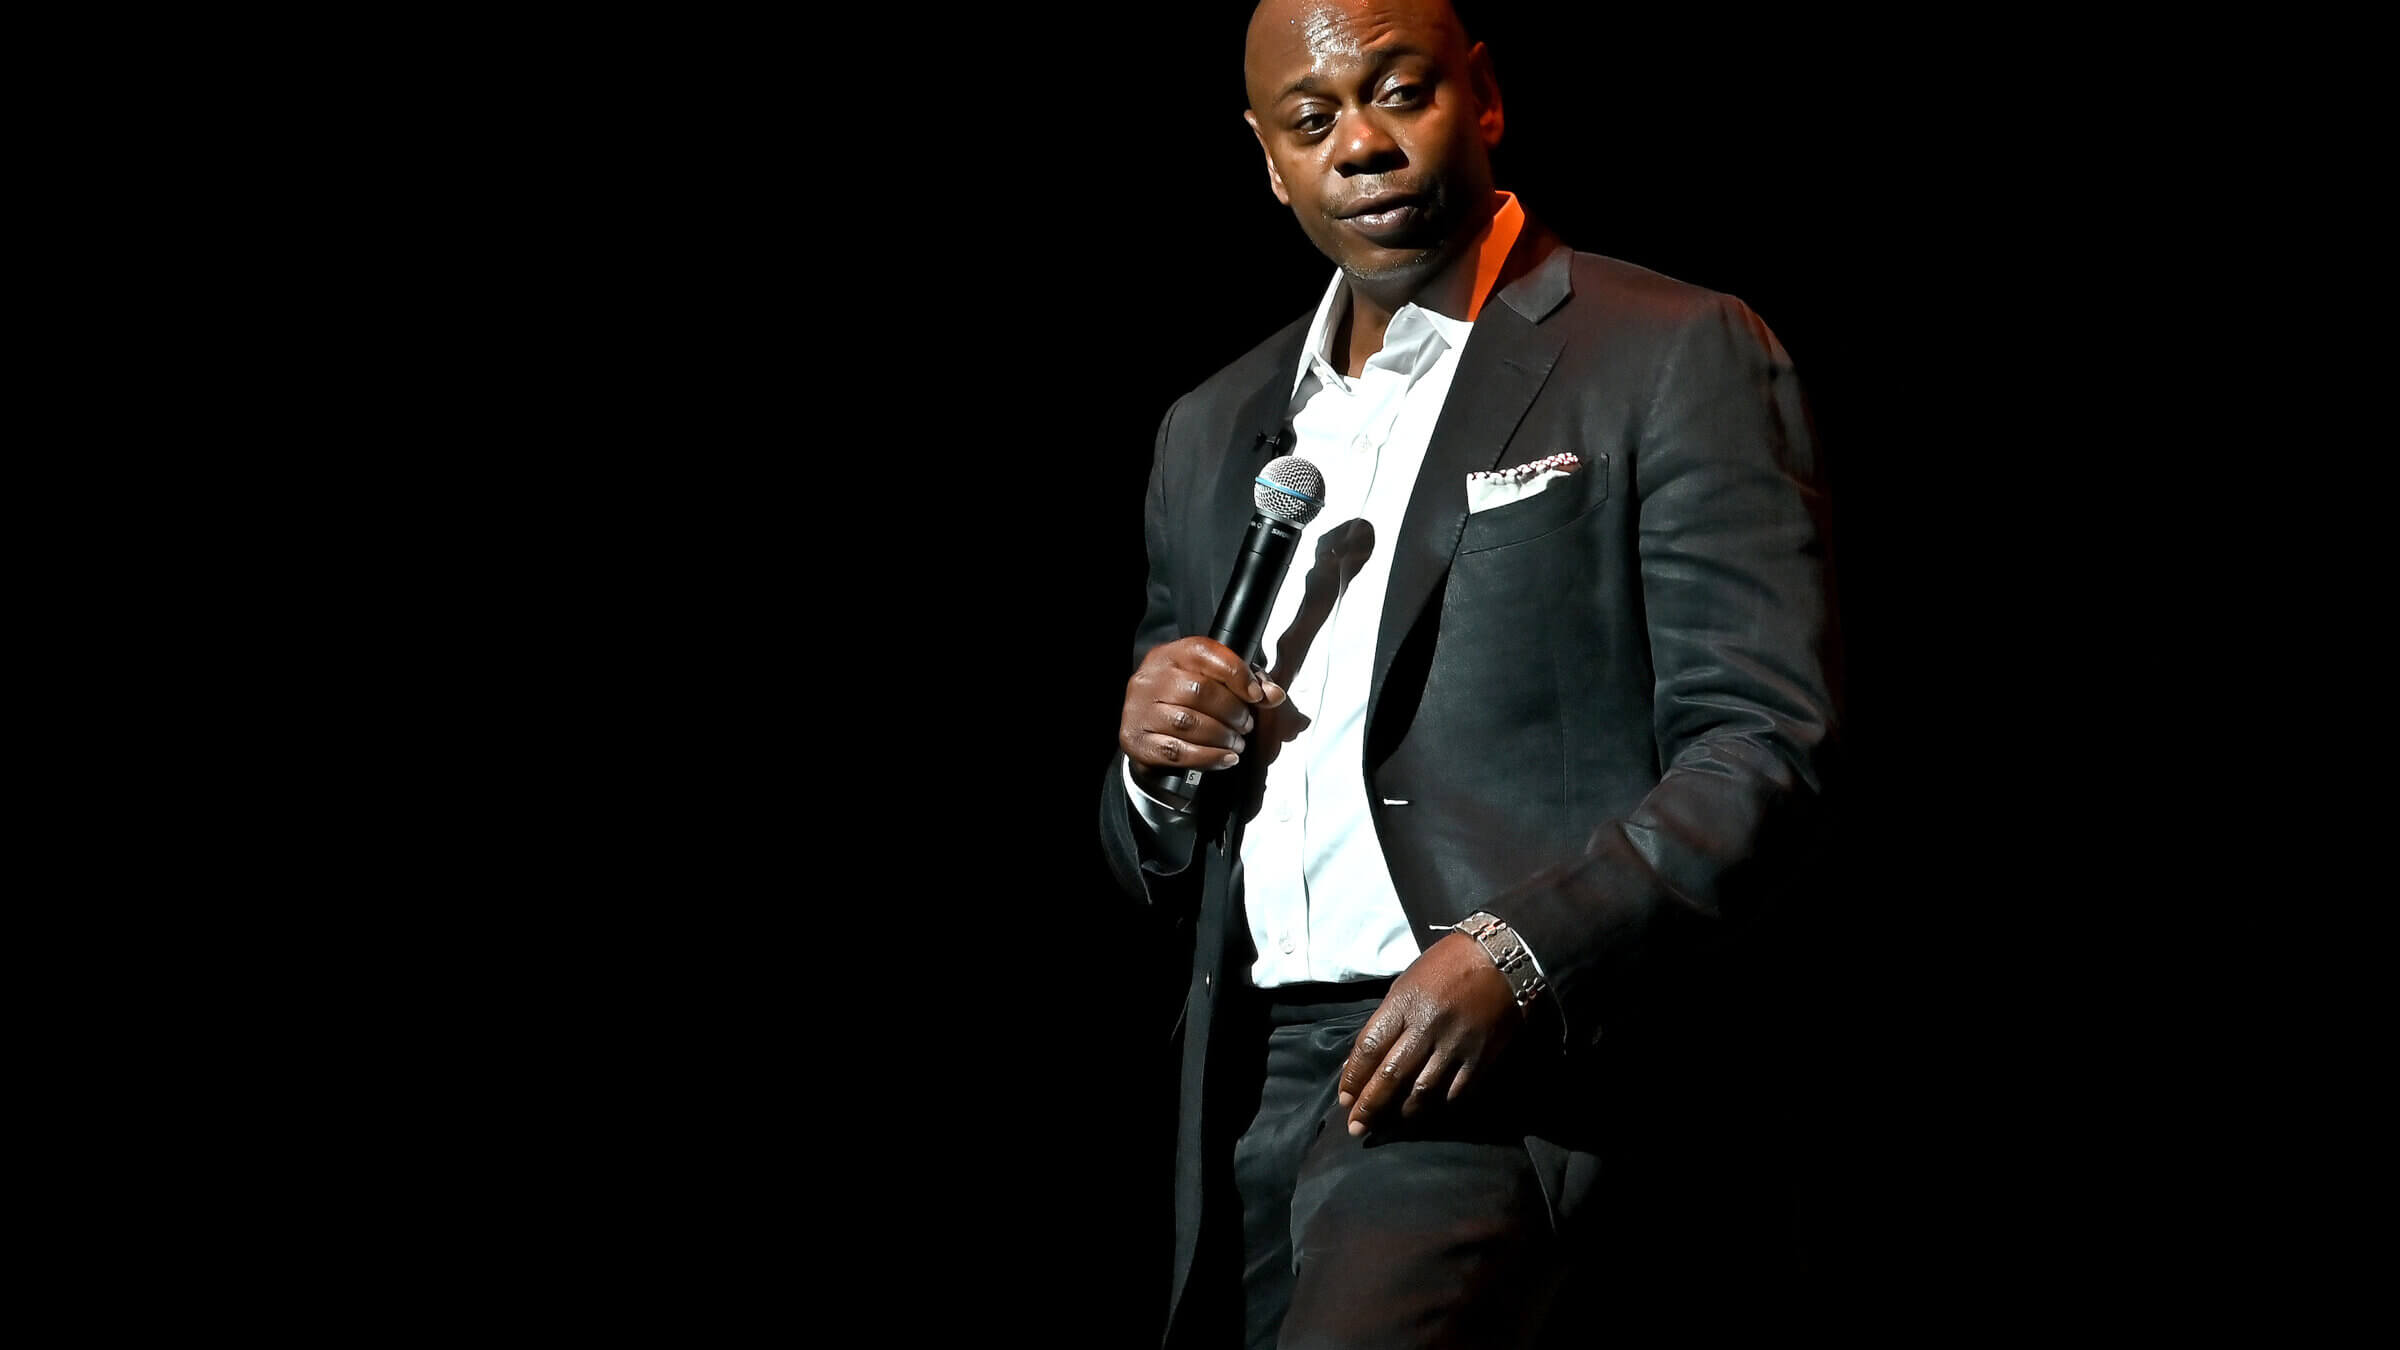 Dave Chappelle performing earlier this year in Washington, D.C.